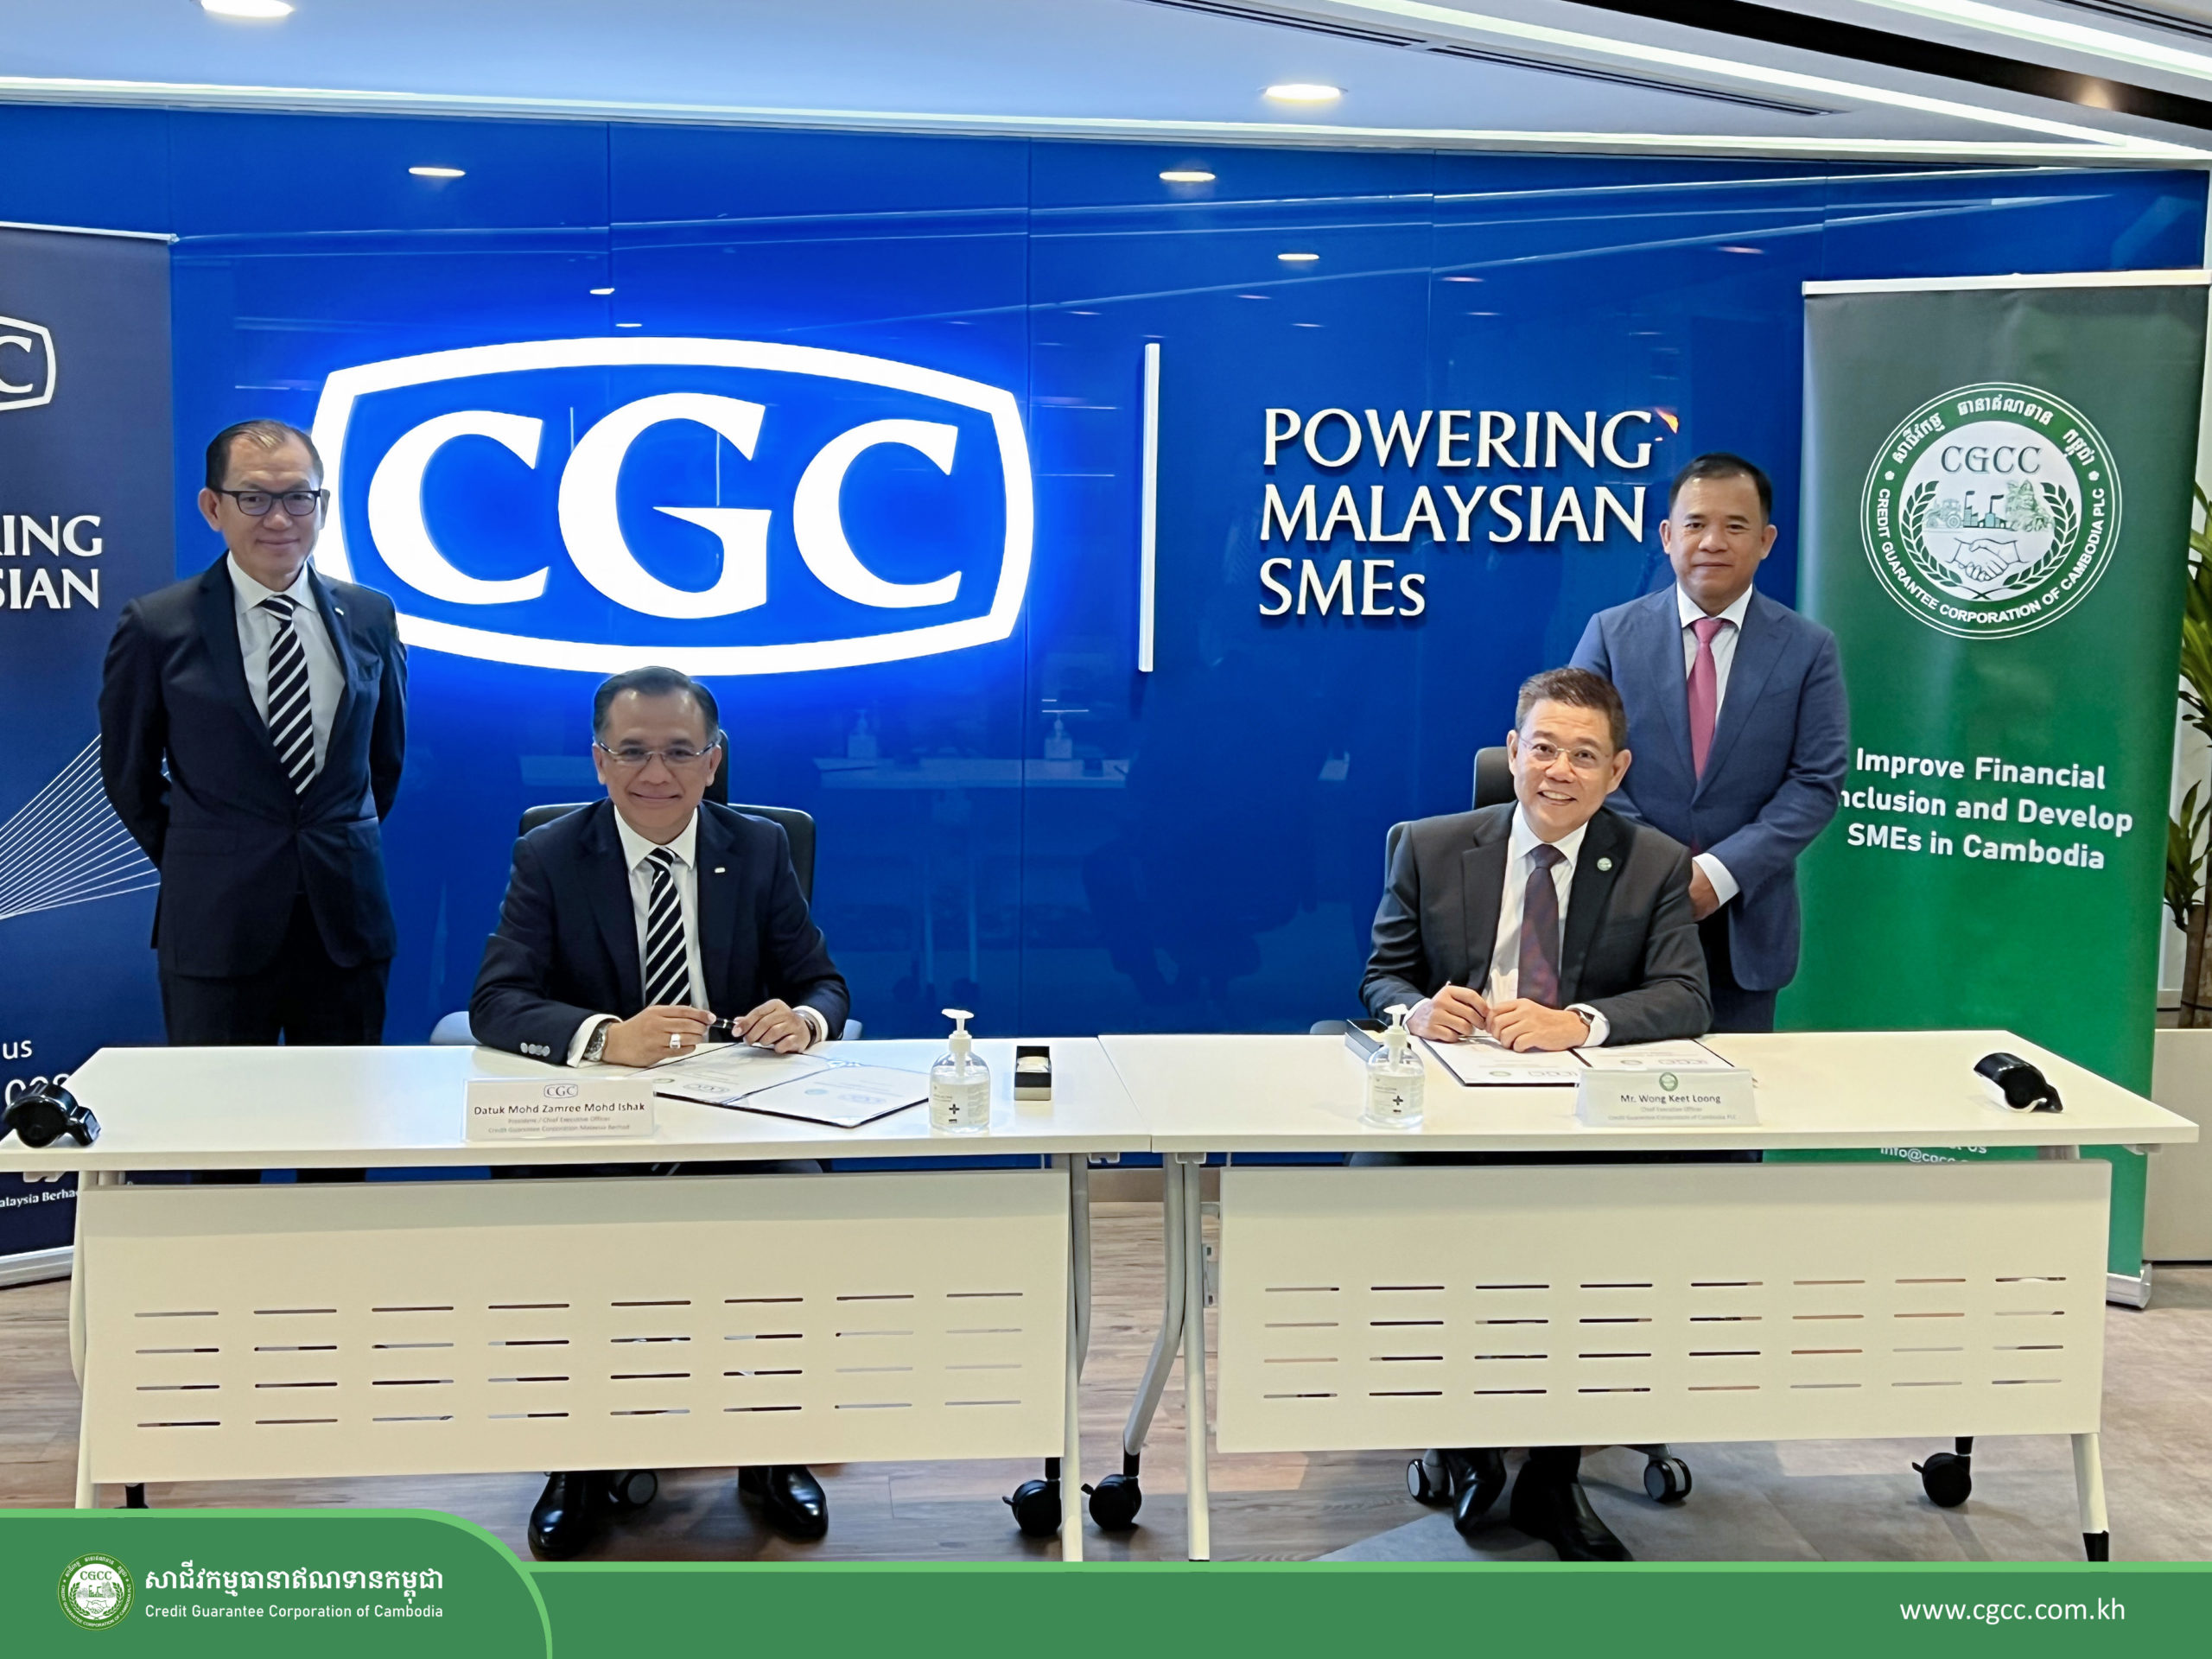 CGCC) and Credit Guarantee Corporation Malaysia Berhad (CGC) signed a Memorandum of Understanding (MoU) agreeing on a collaboration to enhance the development of credit guarantee services